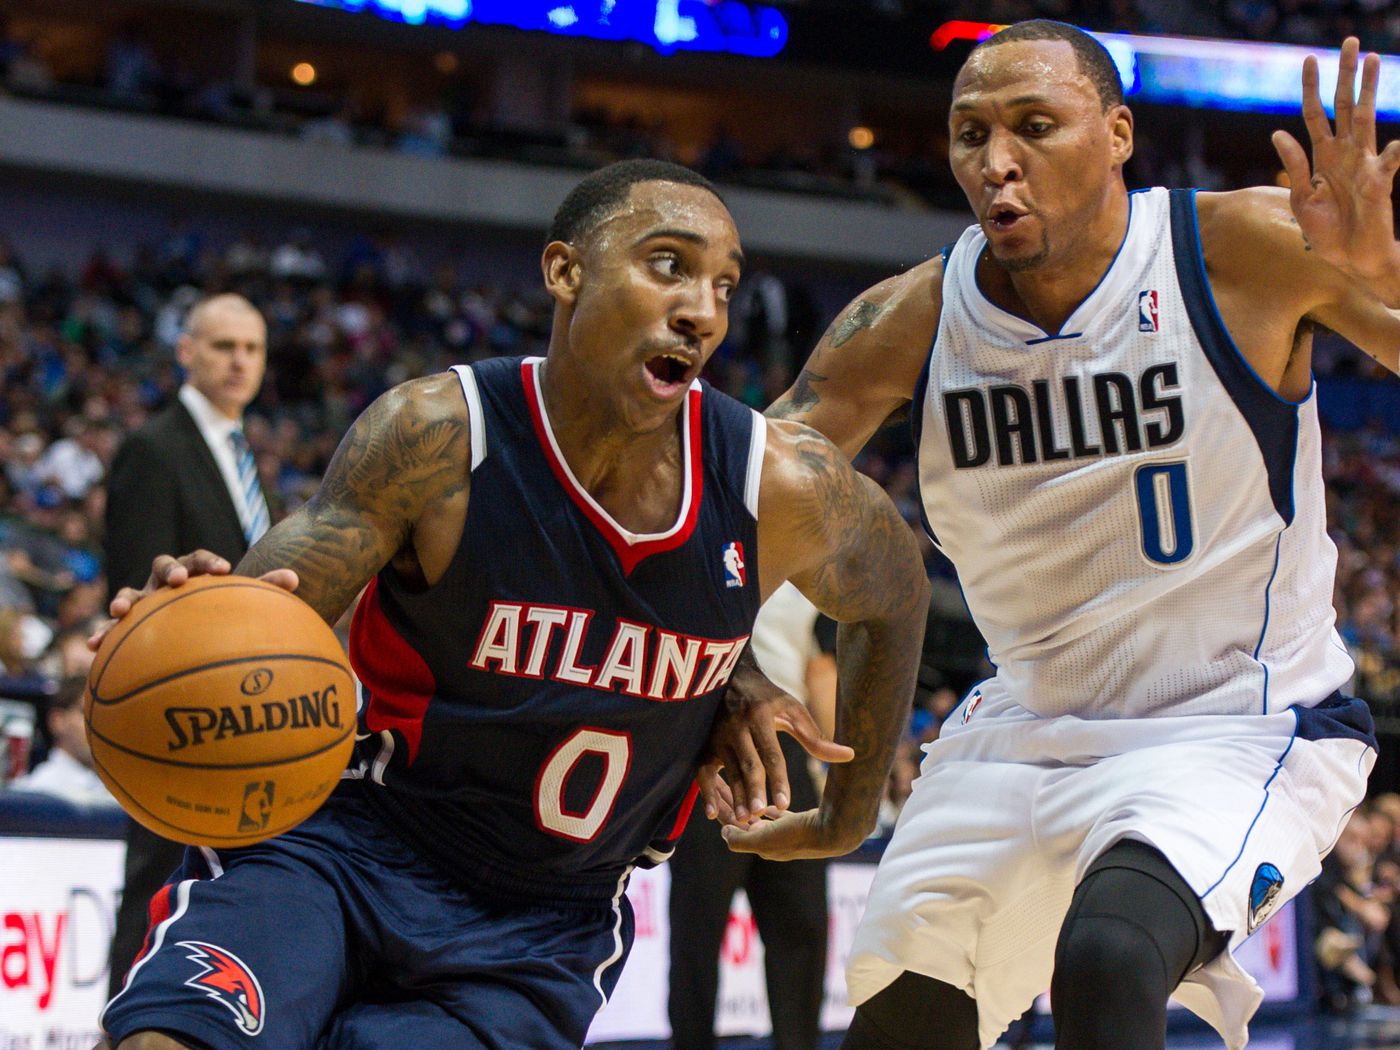 Previewing the Atlanta Hawks: Q&A with Peachtree Hoops - Mavs